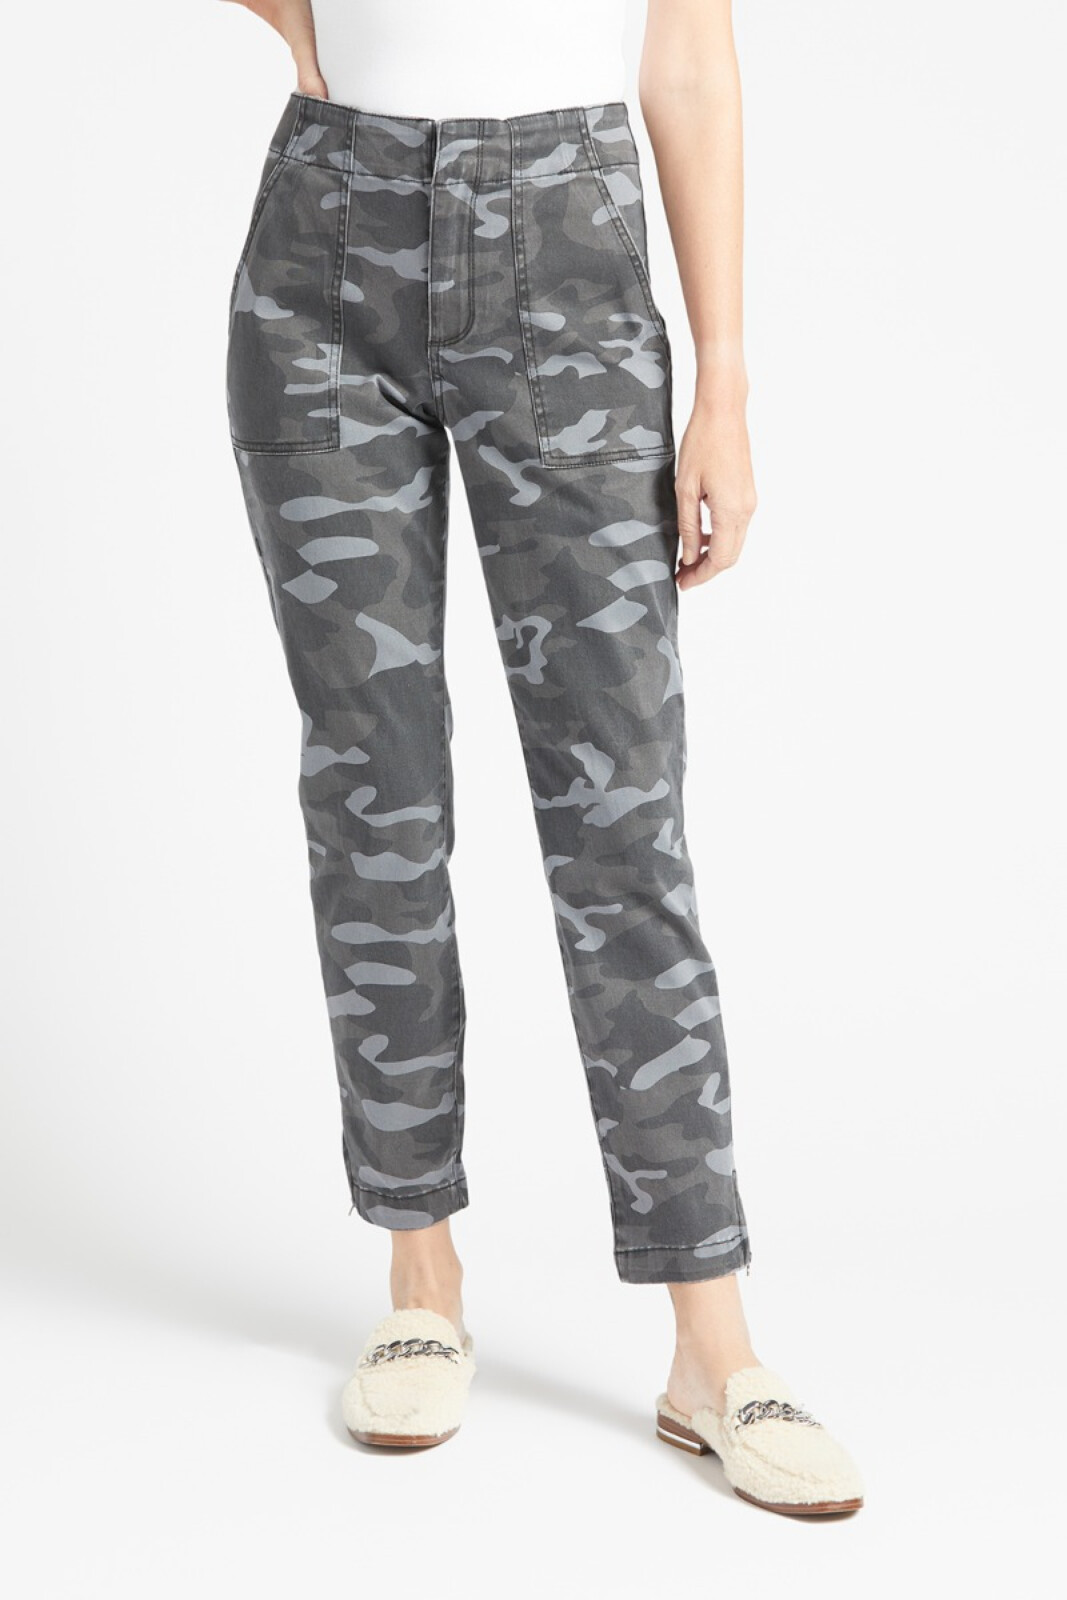 KUT FROM THE KLOTH Camo Reese Utility Pant